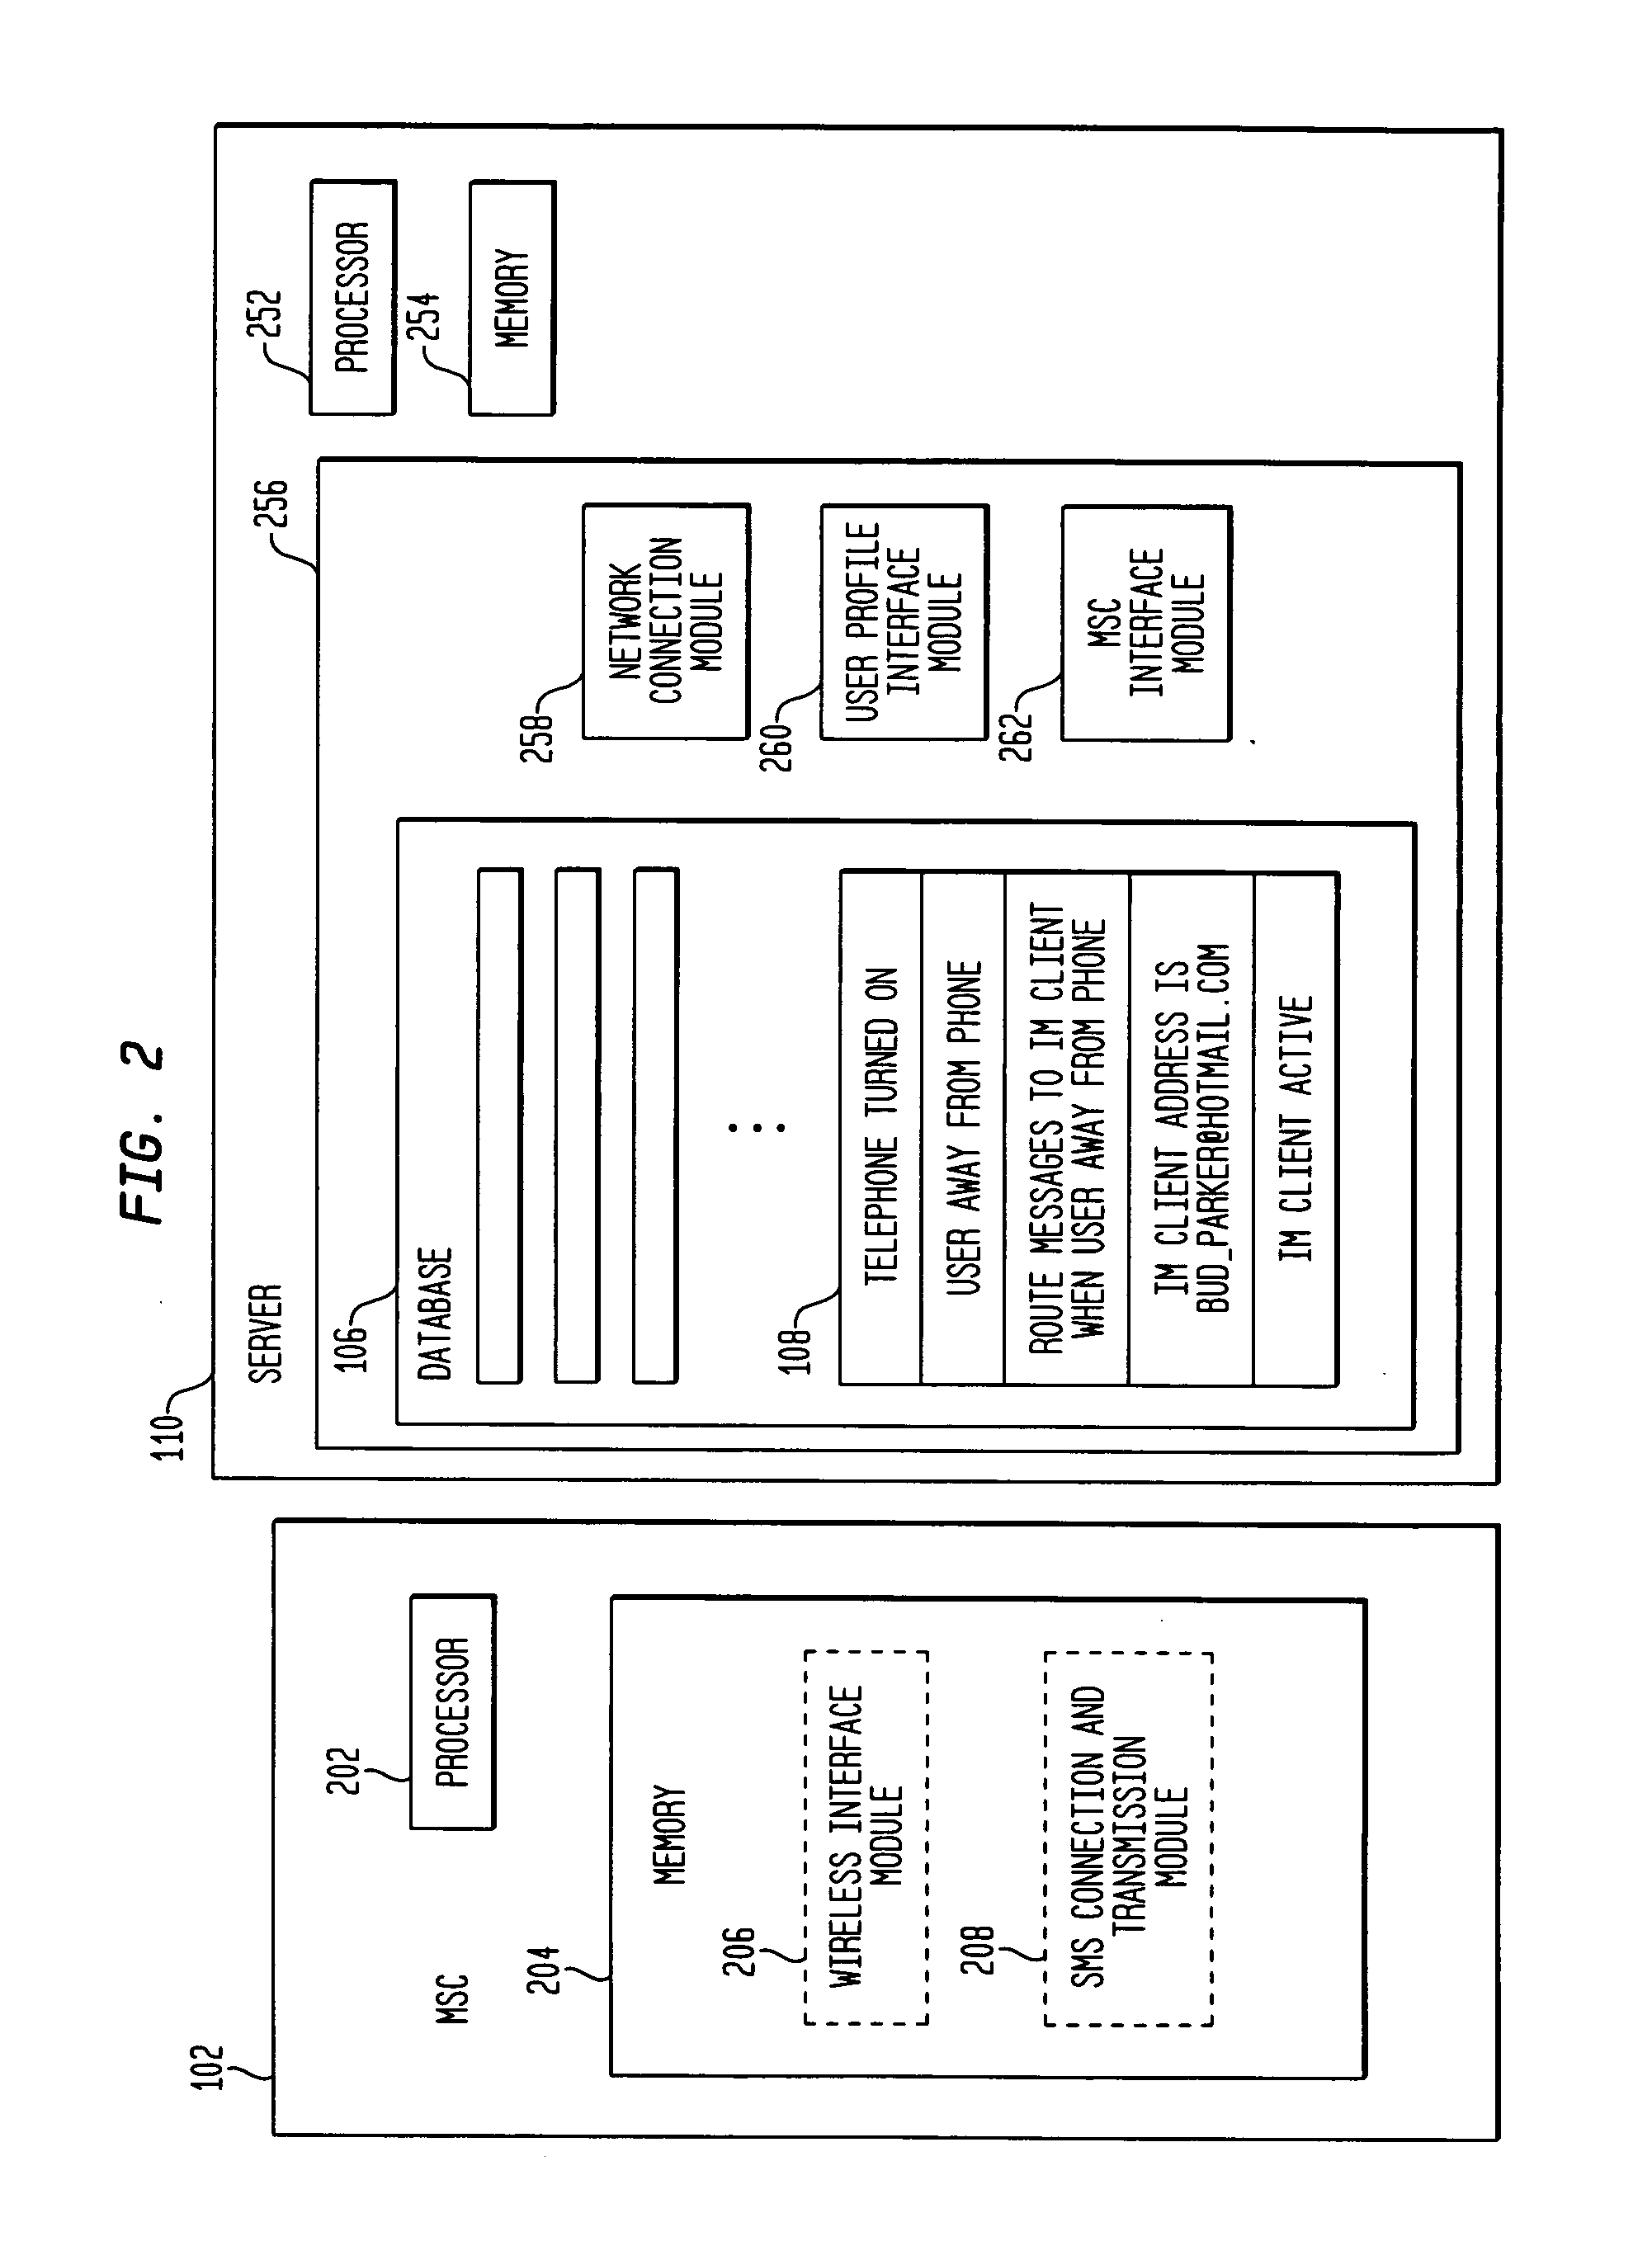 Methods and apparatus for alternative routing of text based messages on a cellular telephone network